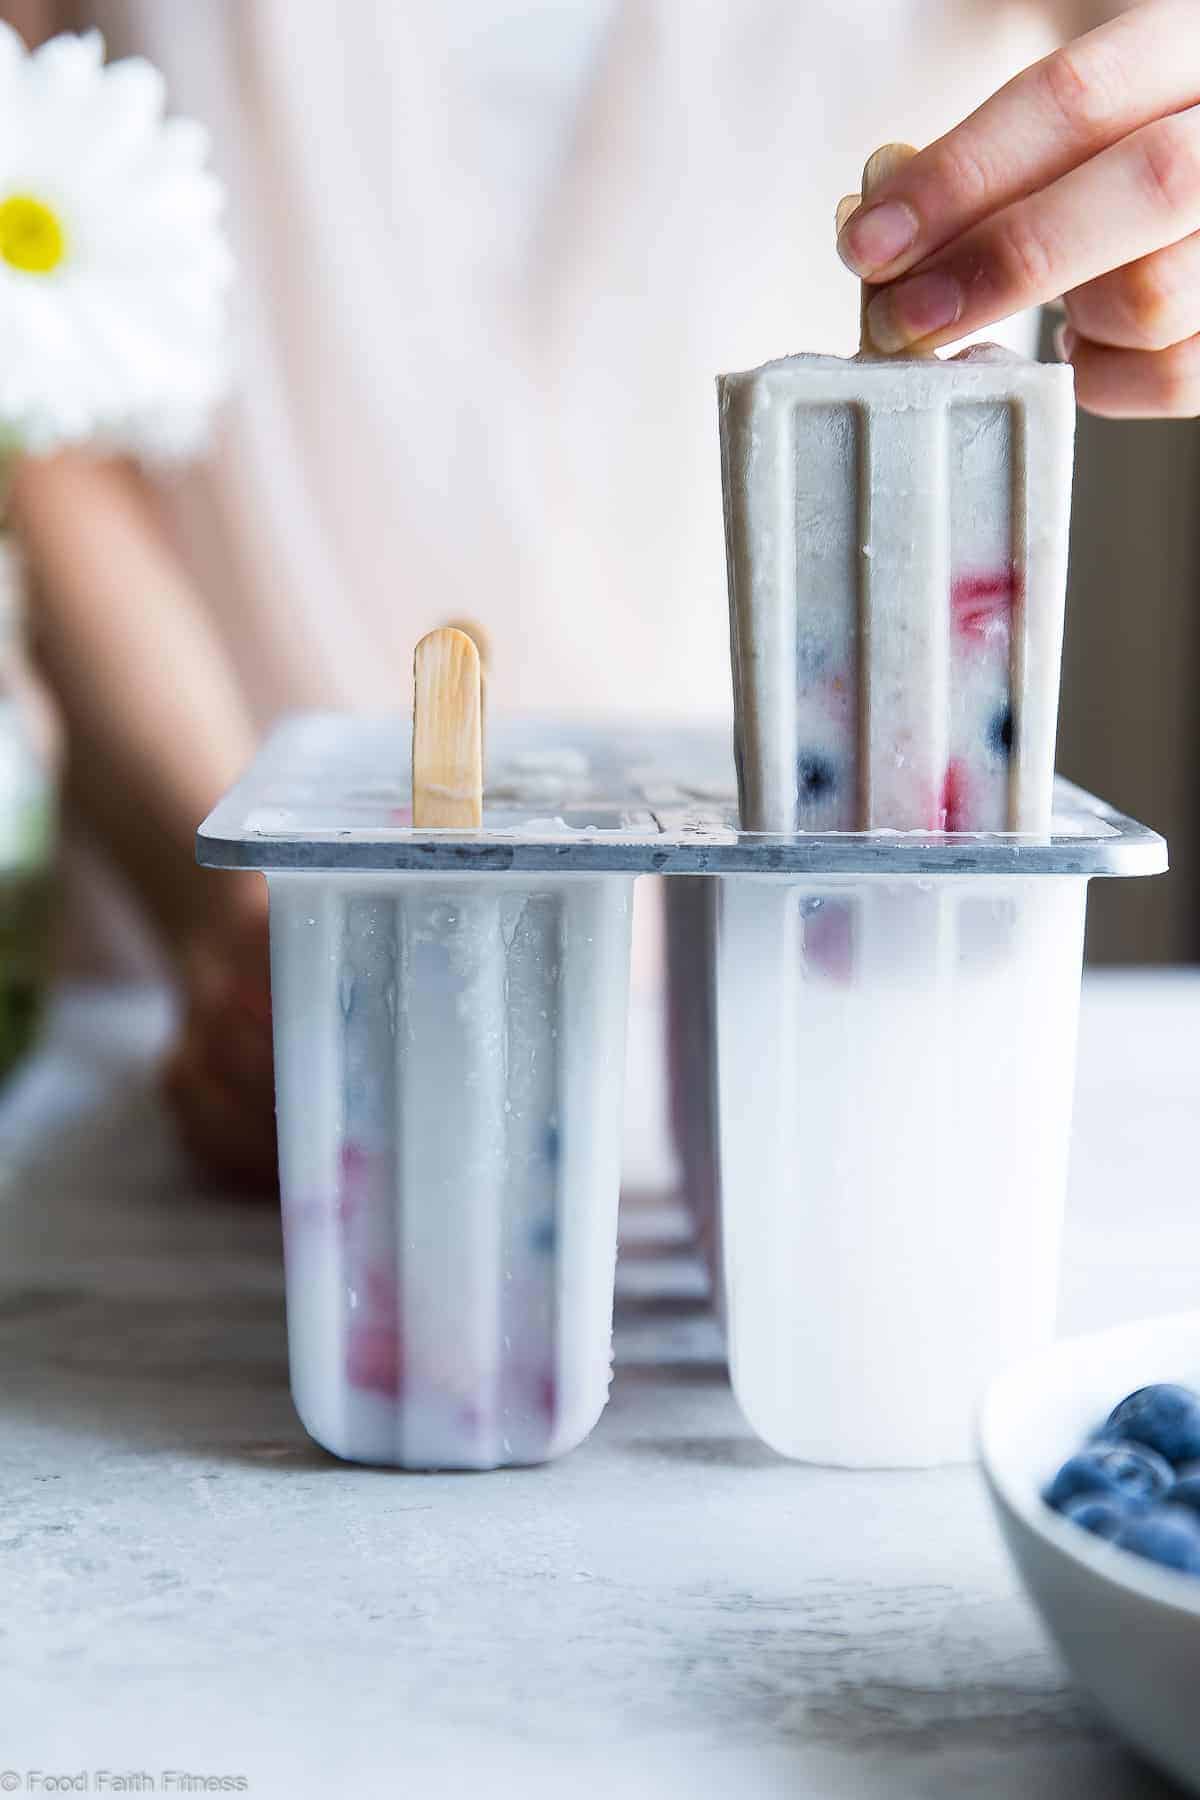 Dairy Free Paleo Banana Pudding Pops - These easy, healthy homemade pudding pops are perfect for the Fourth of July or anytime in the Summer! SO easy and gluten free and paleo/vegan friendly! Kids and adults will LOVE these! | #Foodfaithfitness | #Glutenfree #Healthy #Paleo #Vegan #July4th